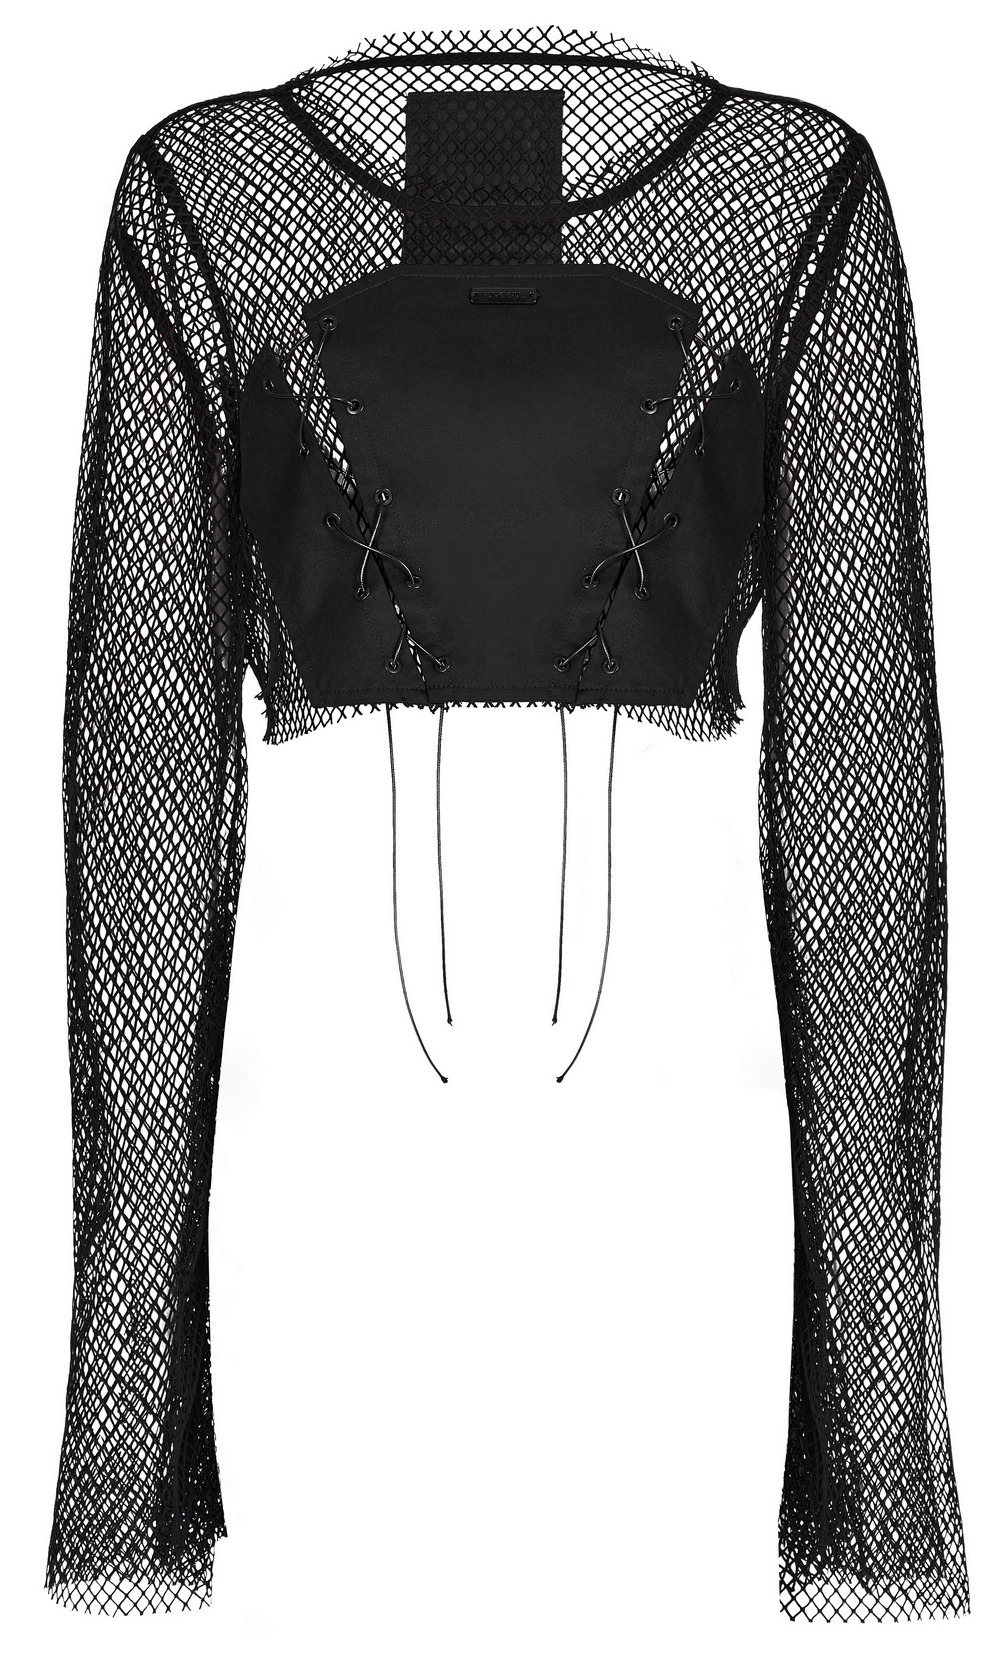 Gothic Mesh Sleeve Top with Punk Lacing Accents